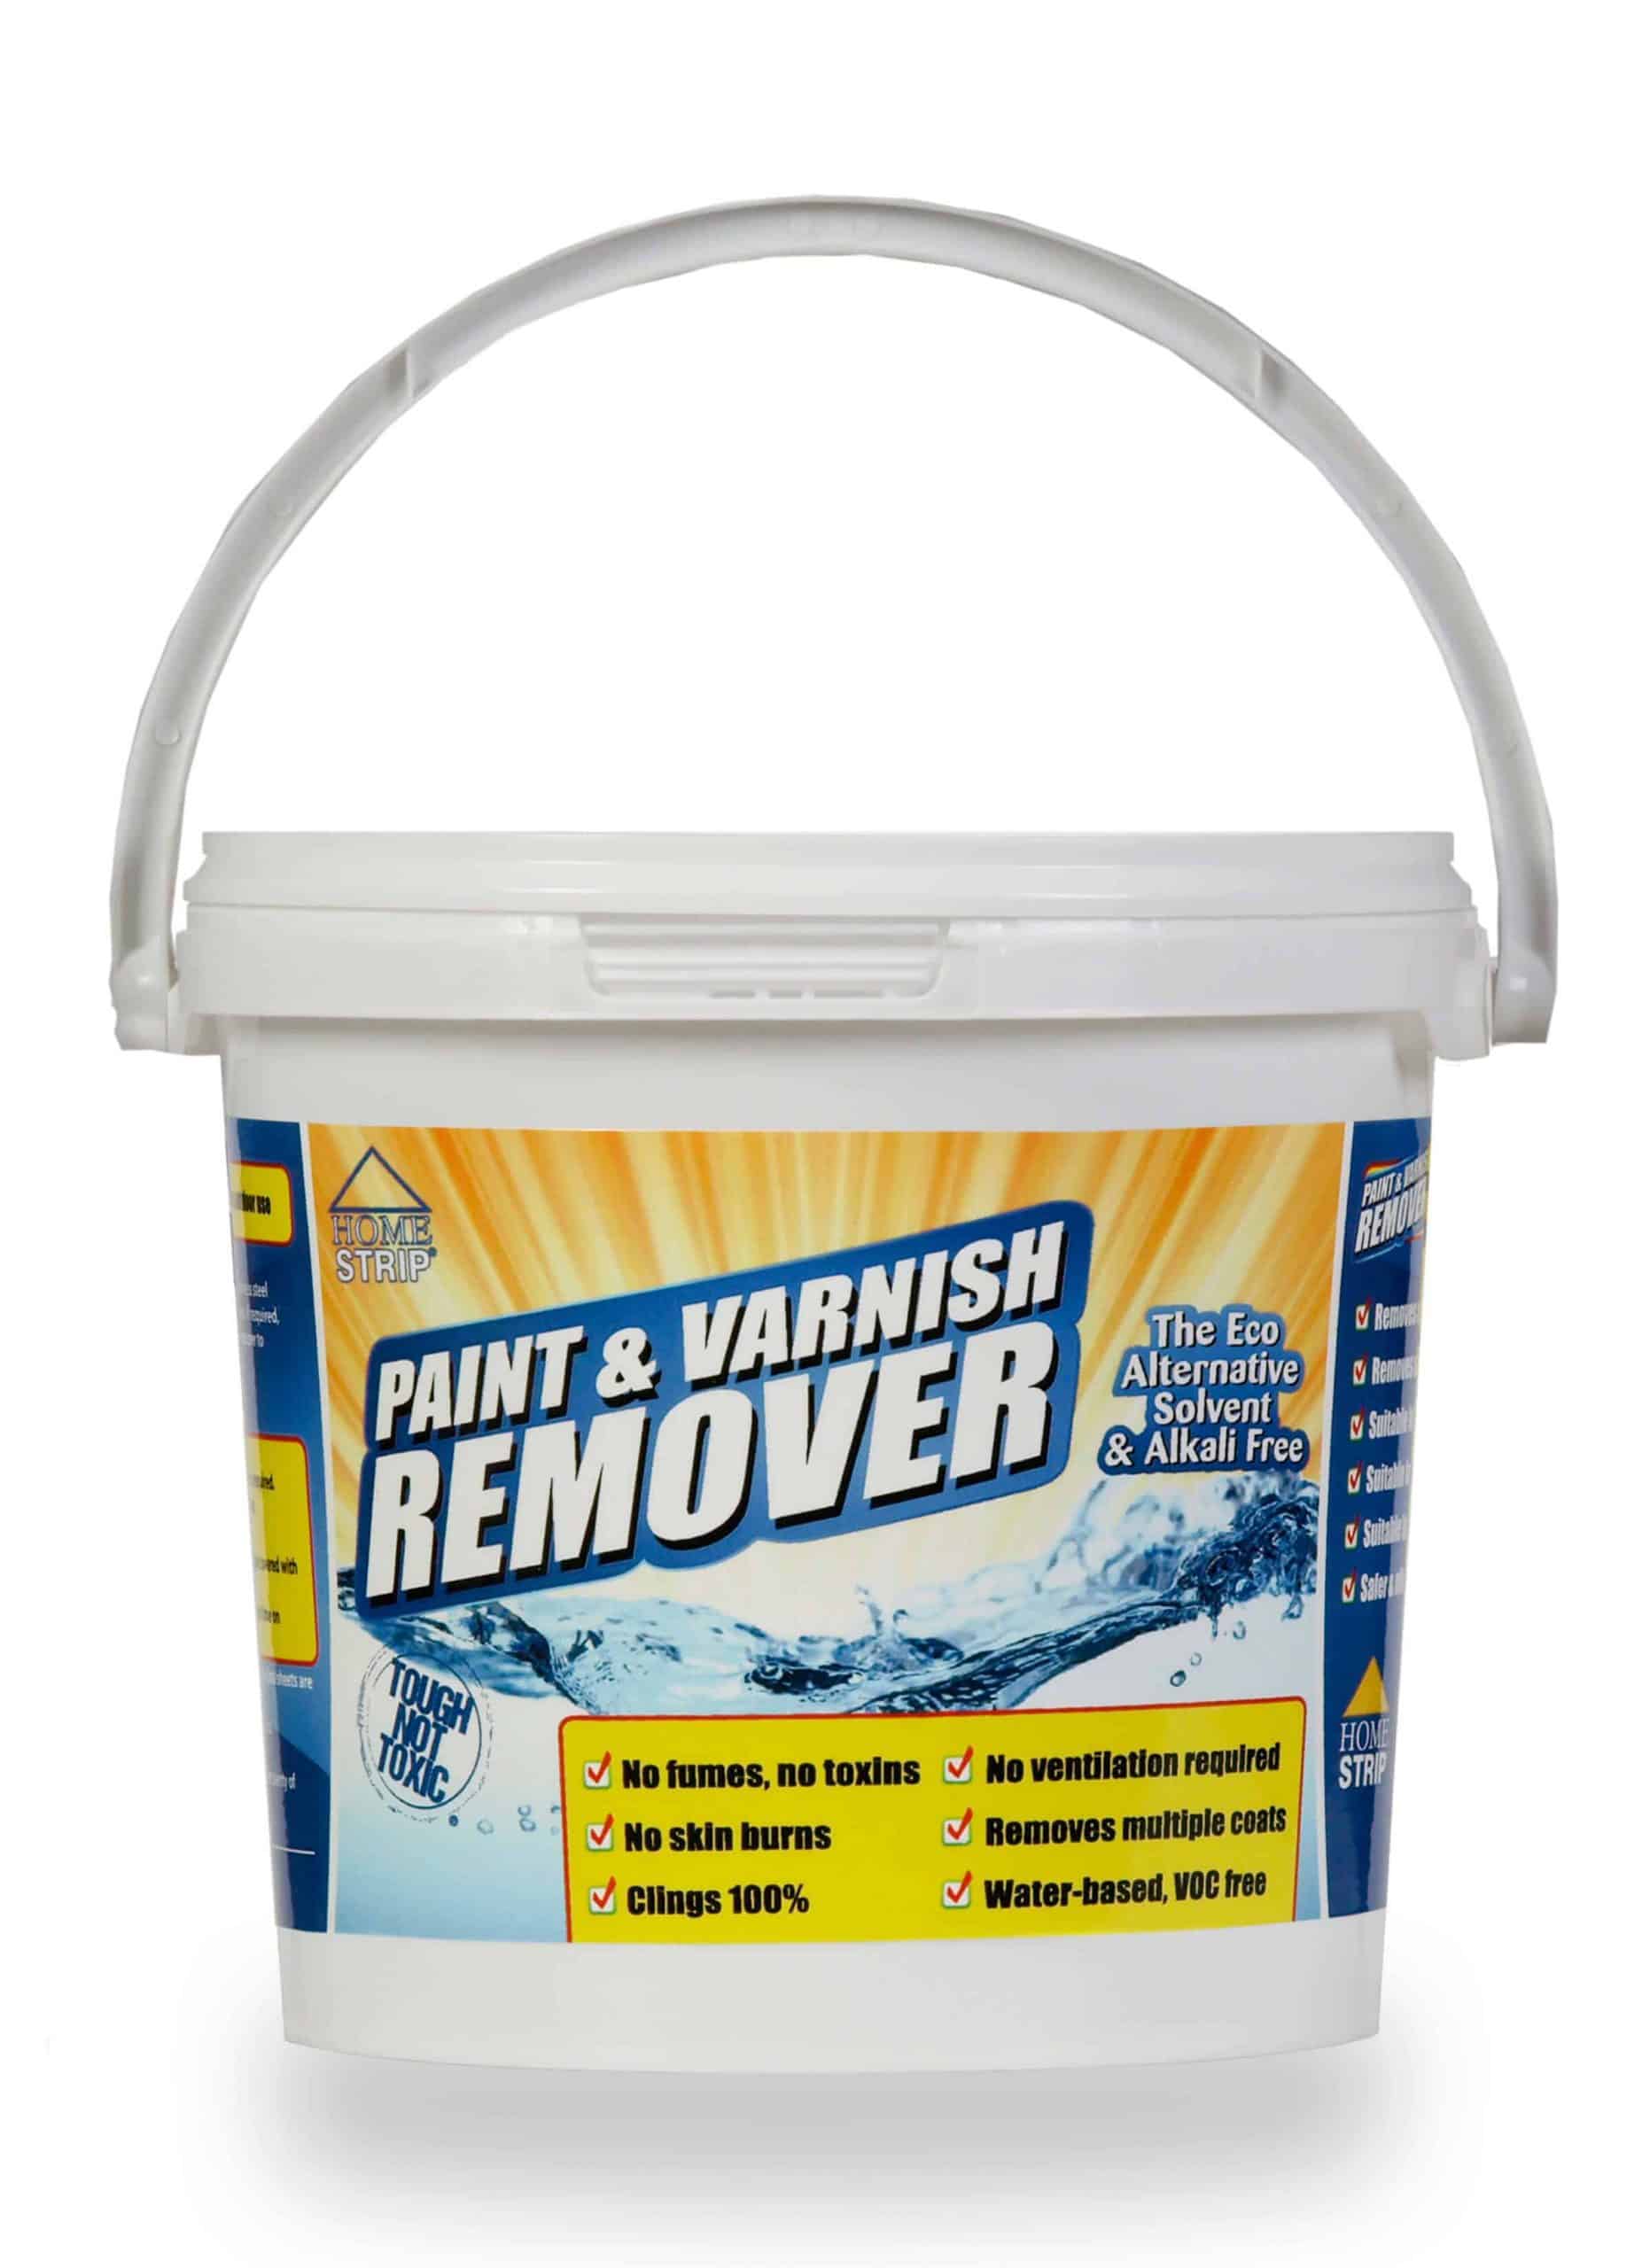 Non-Toxic Paint Strippers (All Types Compared) - My Chemical-Free House